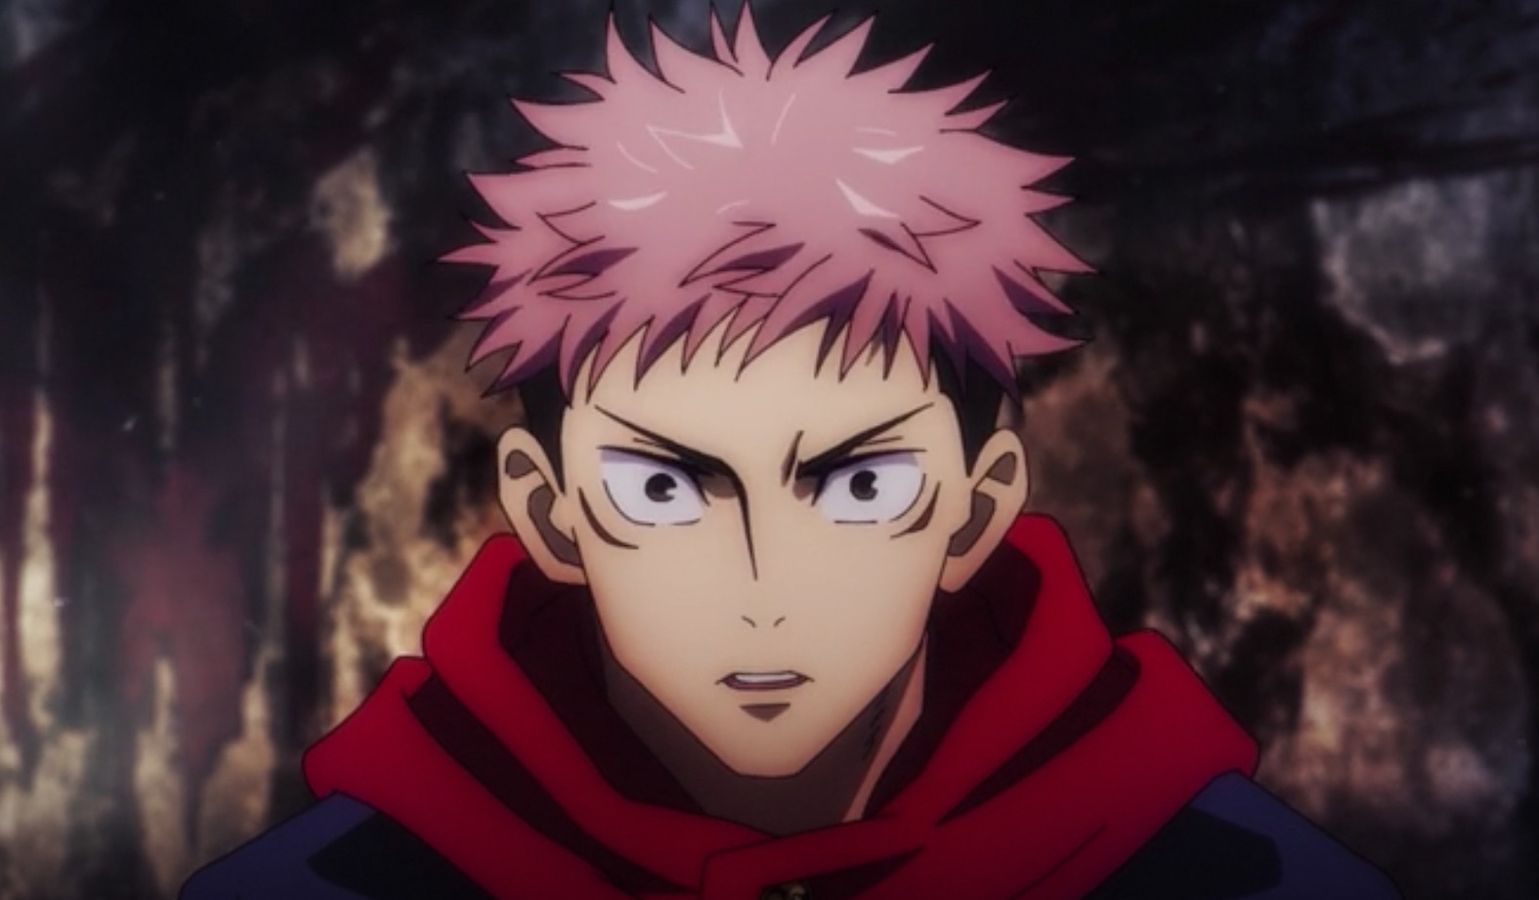 Is the Jujutsu Kaisen Manga the same as the Anime? Differences -About 